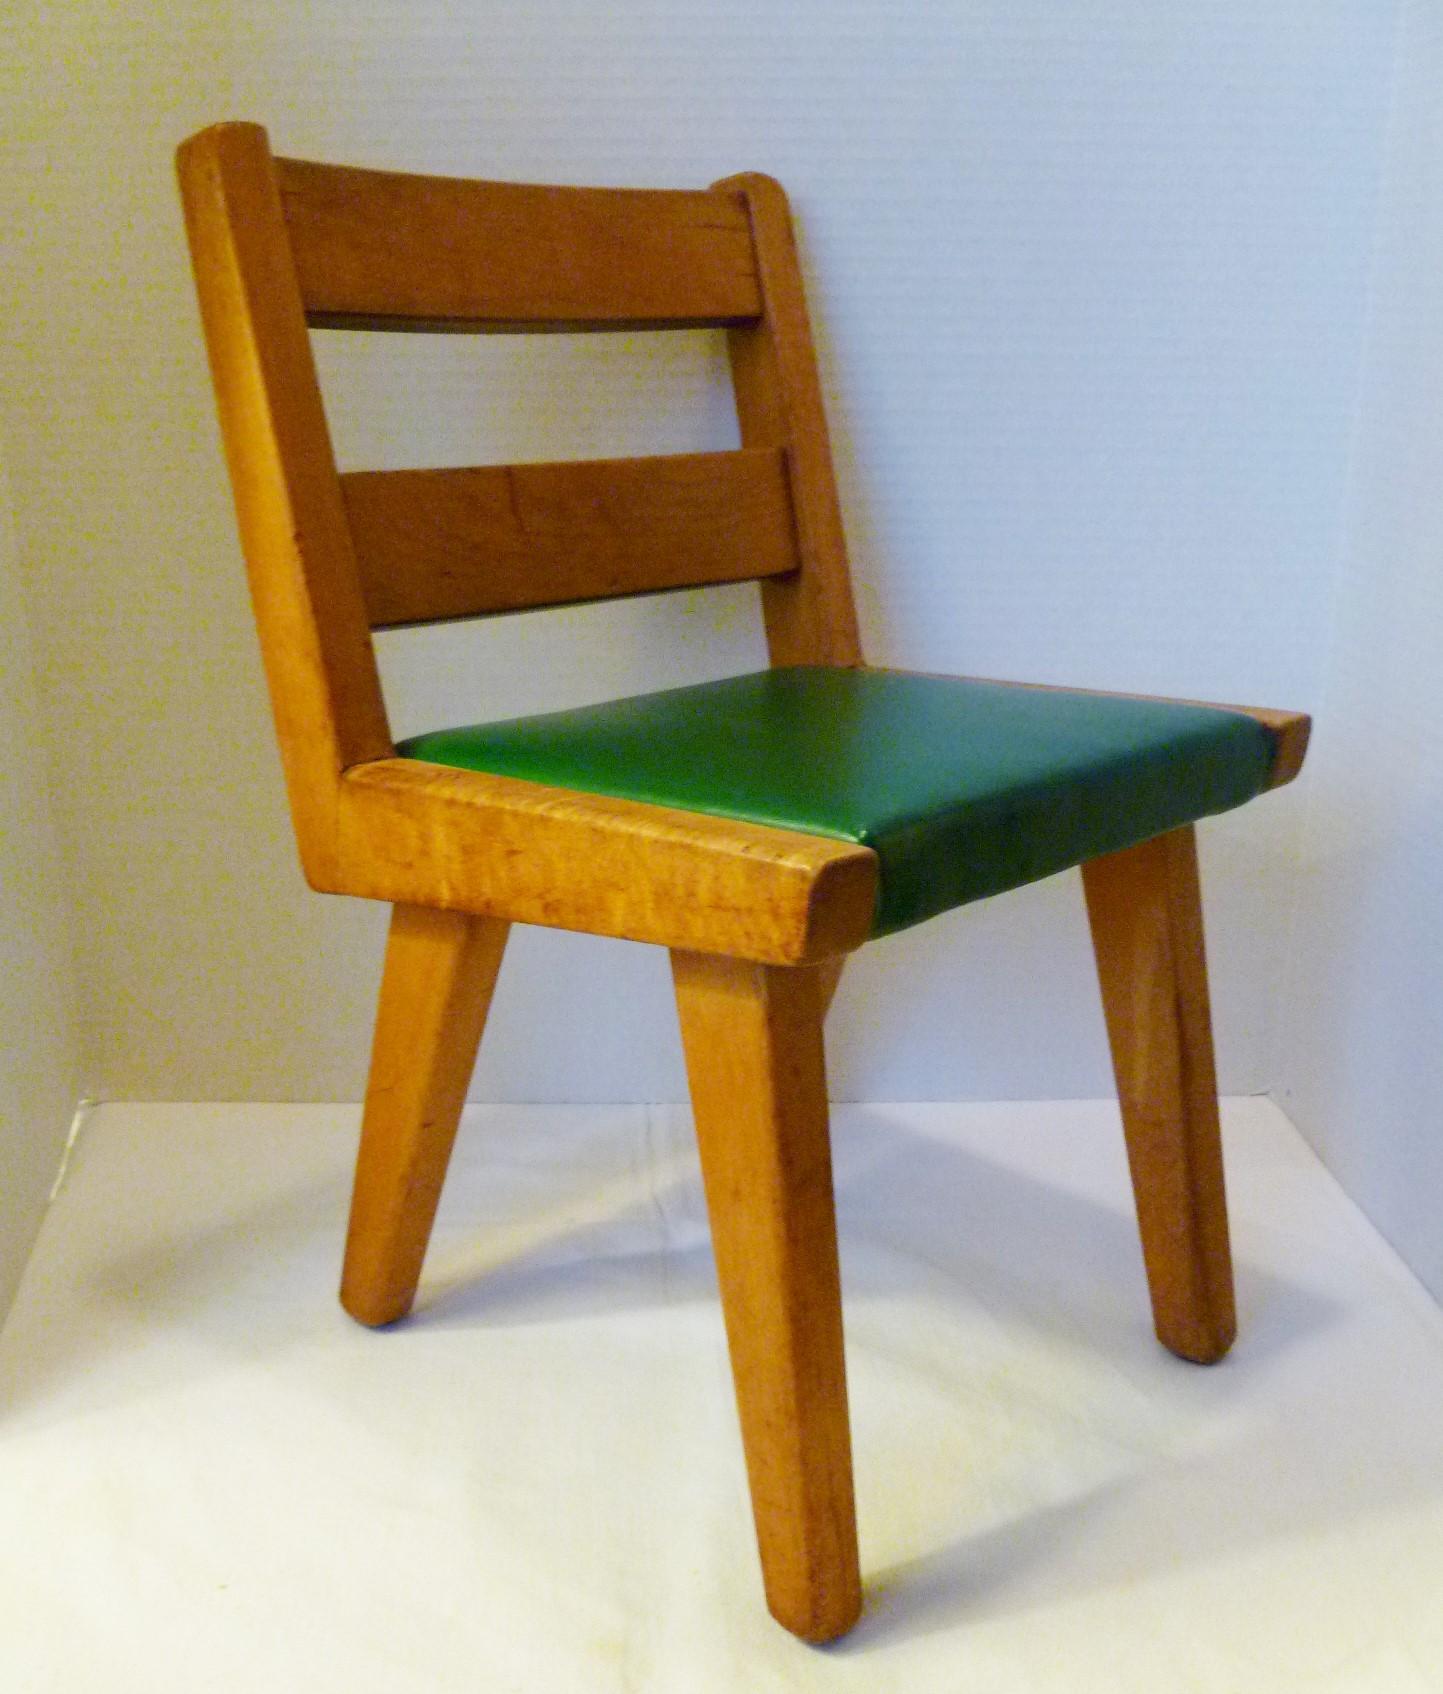 Adorable Mid-Century Modern child's chair in the style of Jens Risom. In blond wood with green vinyl seat covering. Original, in very good vintage condition with appropriate patina. Possibly a Salesman's sample size.
Measurements: 10 3/4 inches